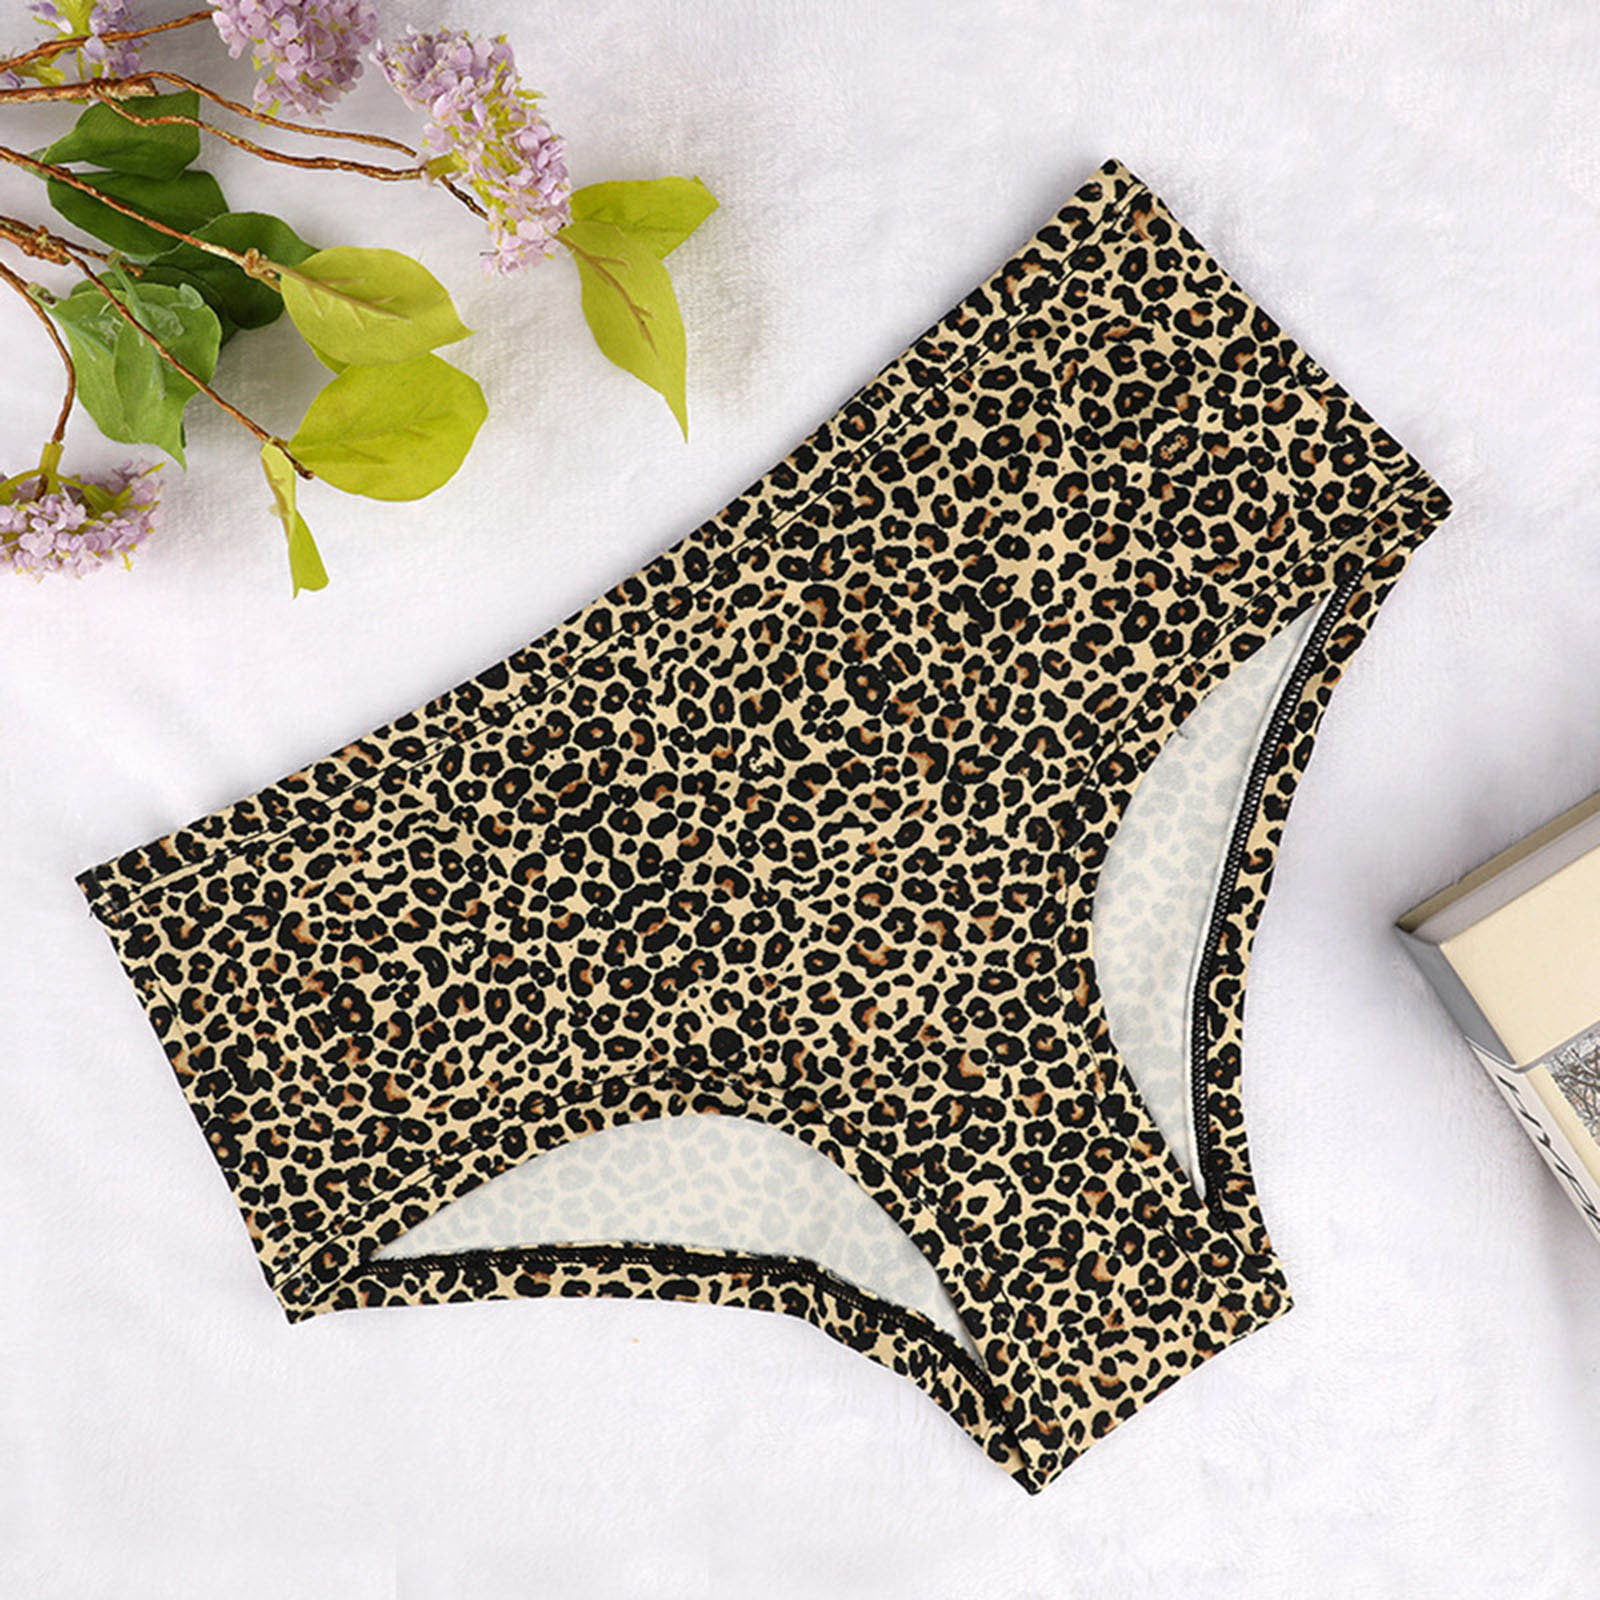 Shop Leopard Print Underwear Women with great discounts and prices